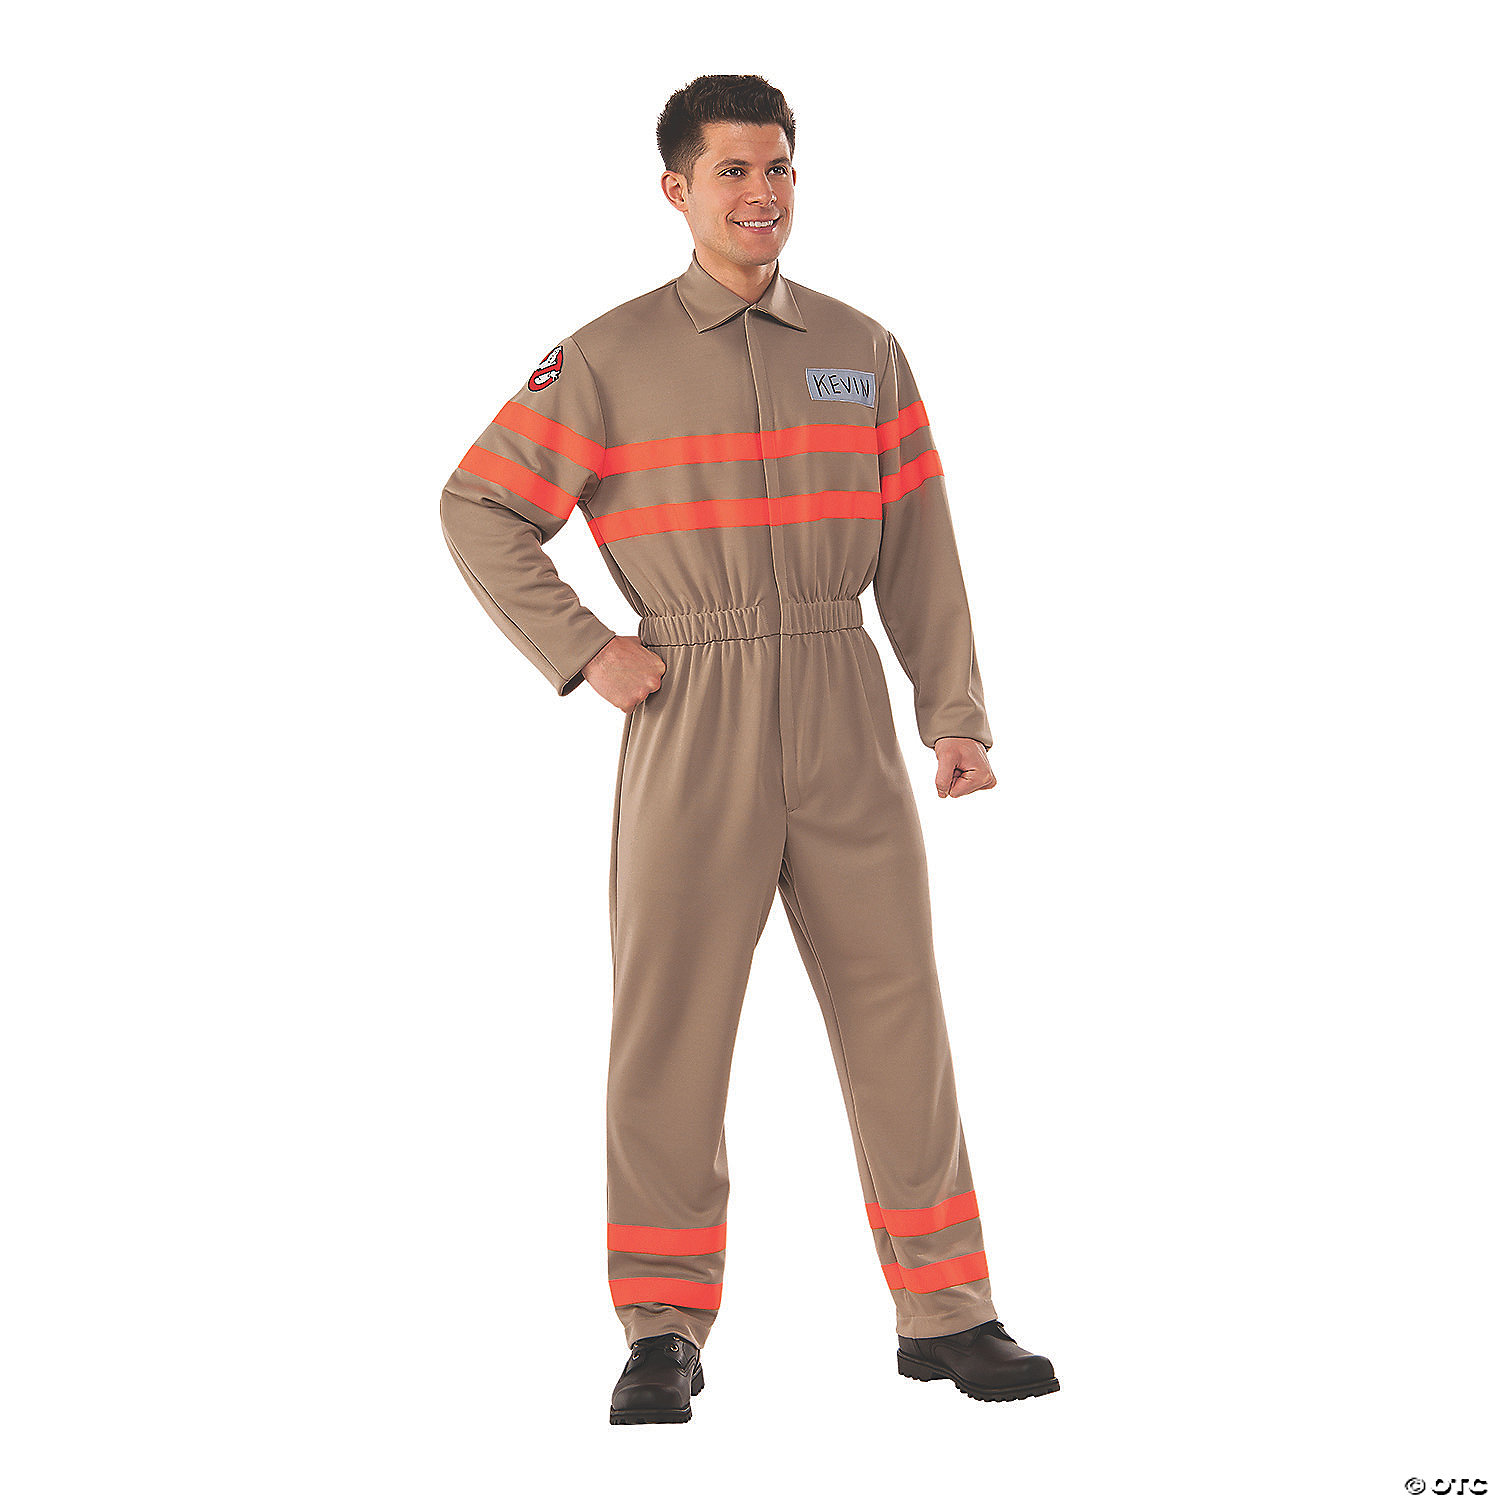 Mens Deluxe Kevin Ghostbusters Costume 